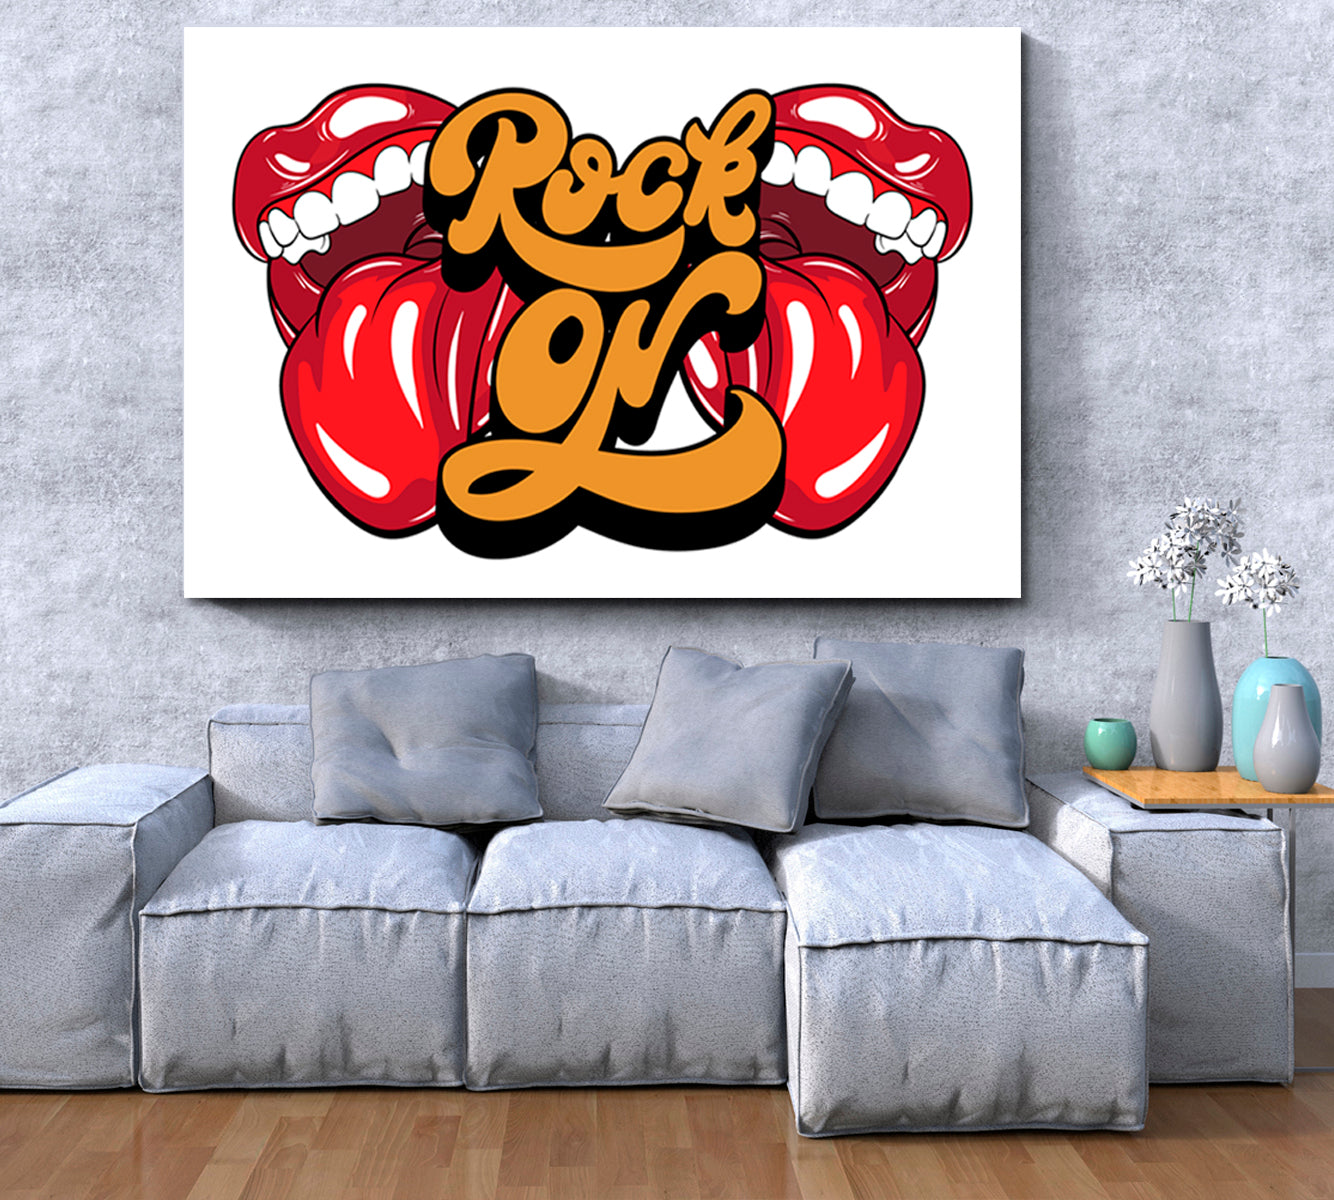 ROCK ON Rolling Stones Tongue Lips Open Mouth Rock And Roll Poster Pop Art Canvas Print Artesty 1 panel 24" x 16" 